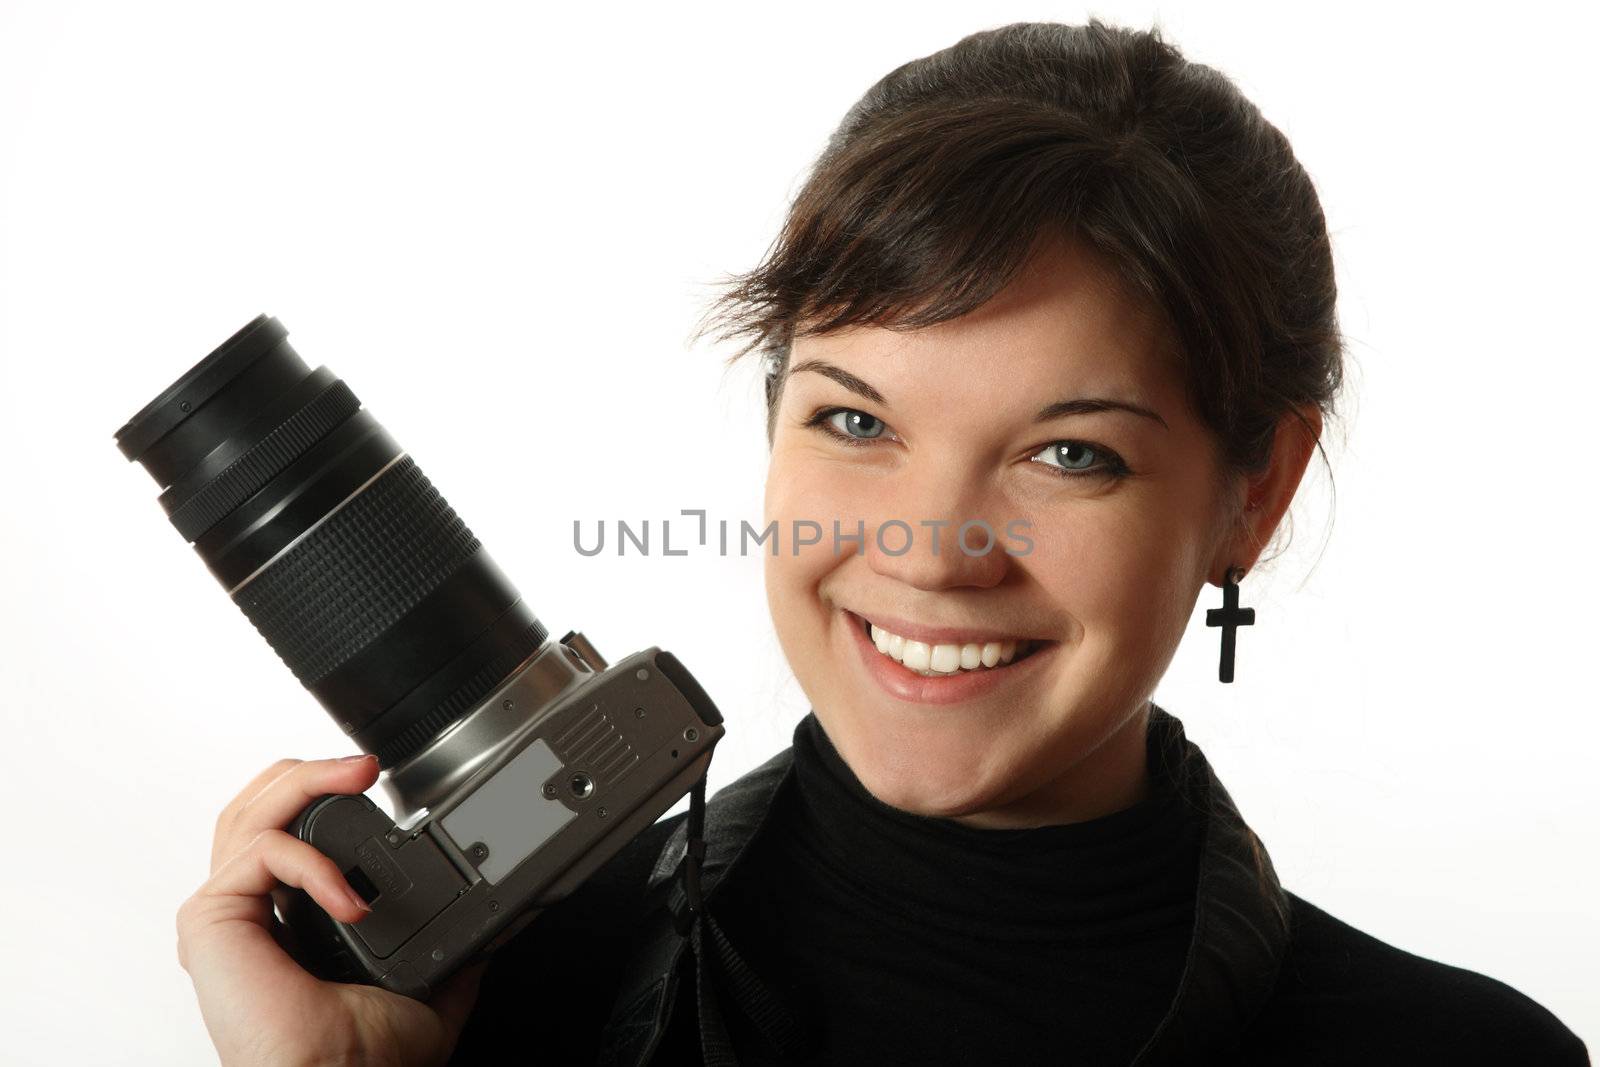 The beautiful girl with a camera on a white background